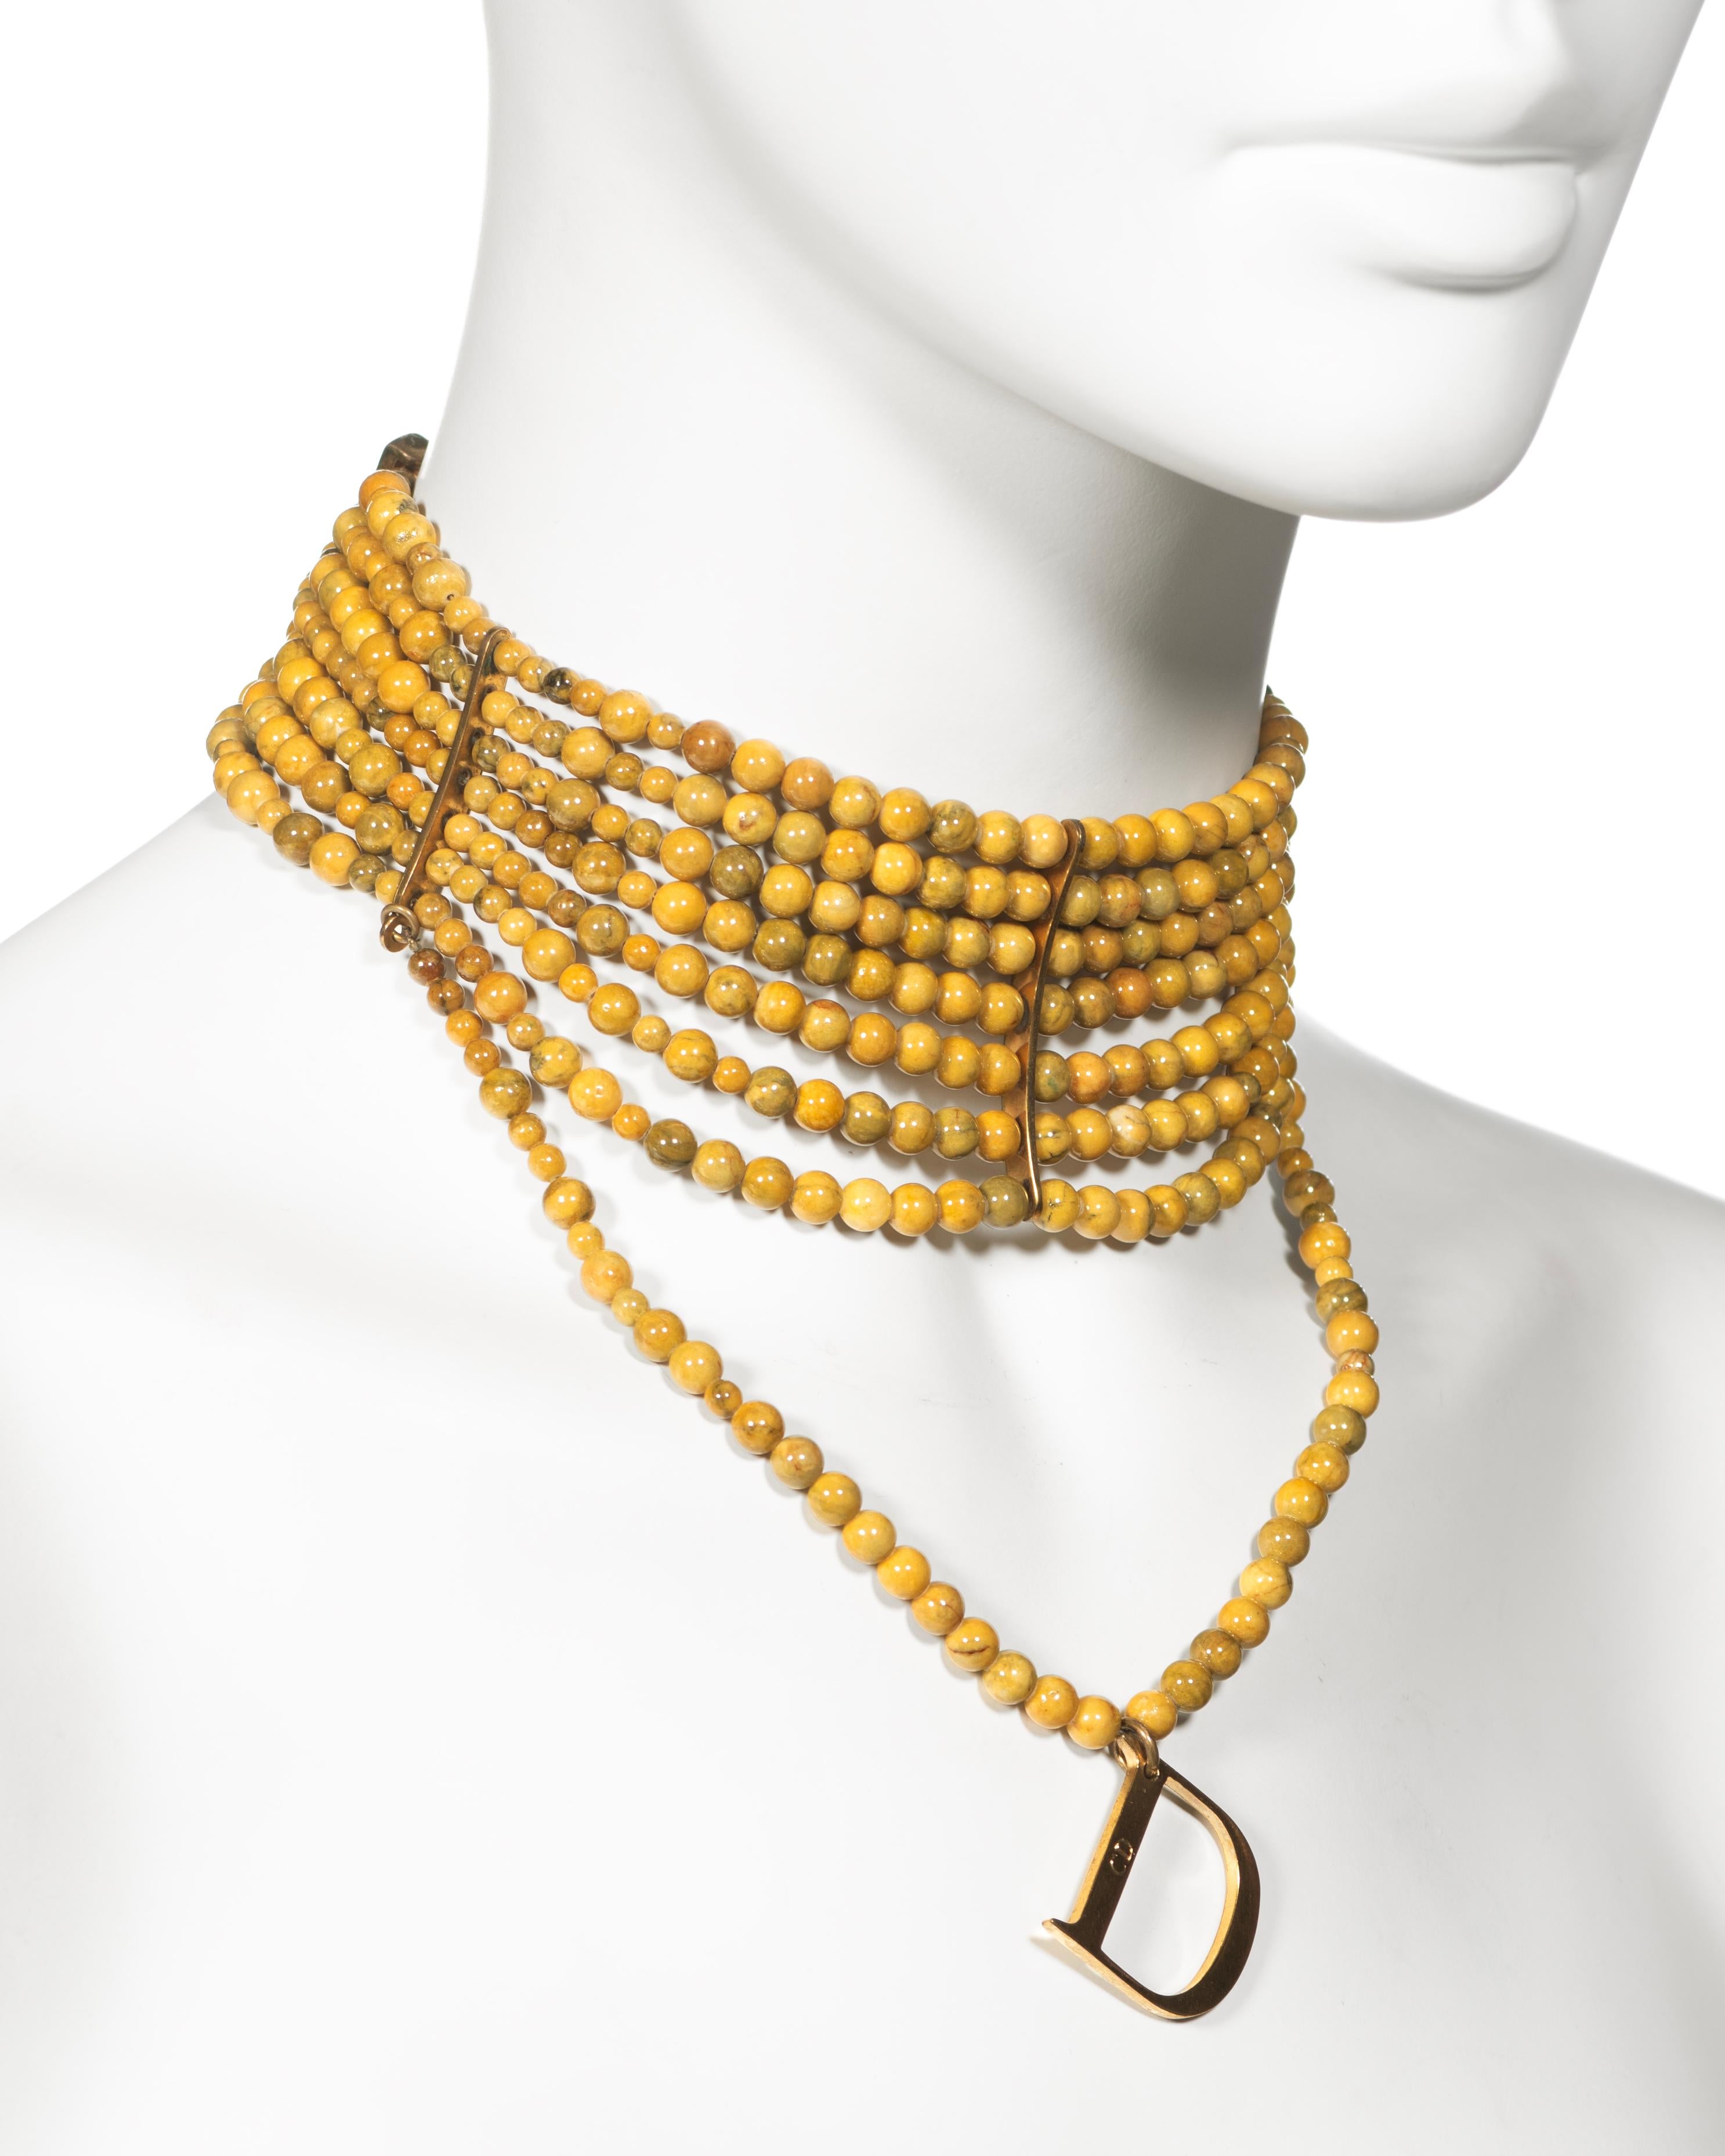 Christian Dior by John Galliano Marbled Glass Bead Choker Necklace, c. 1998 For Sale 6